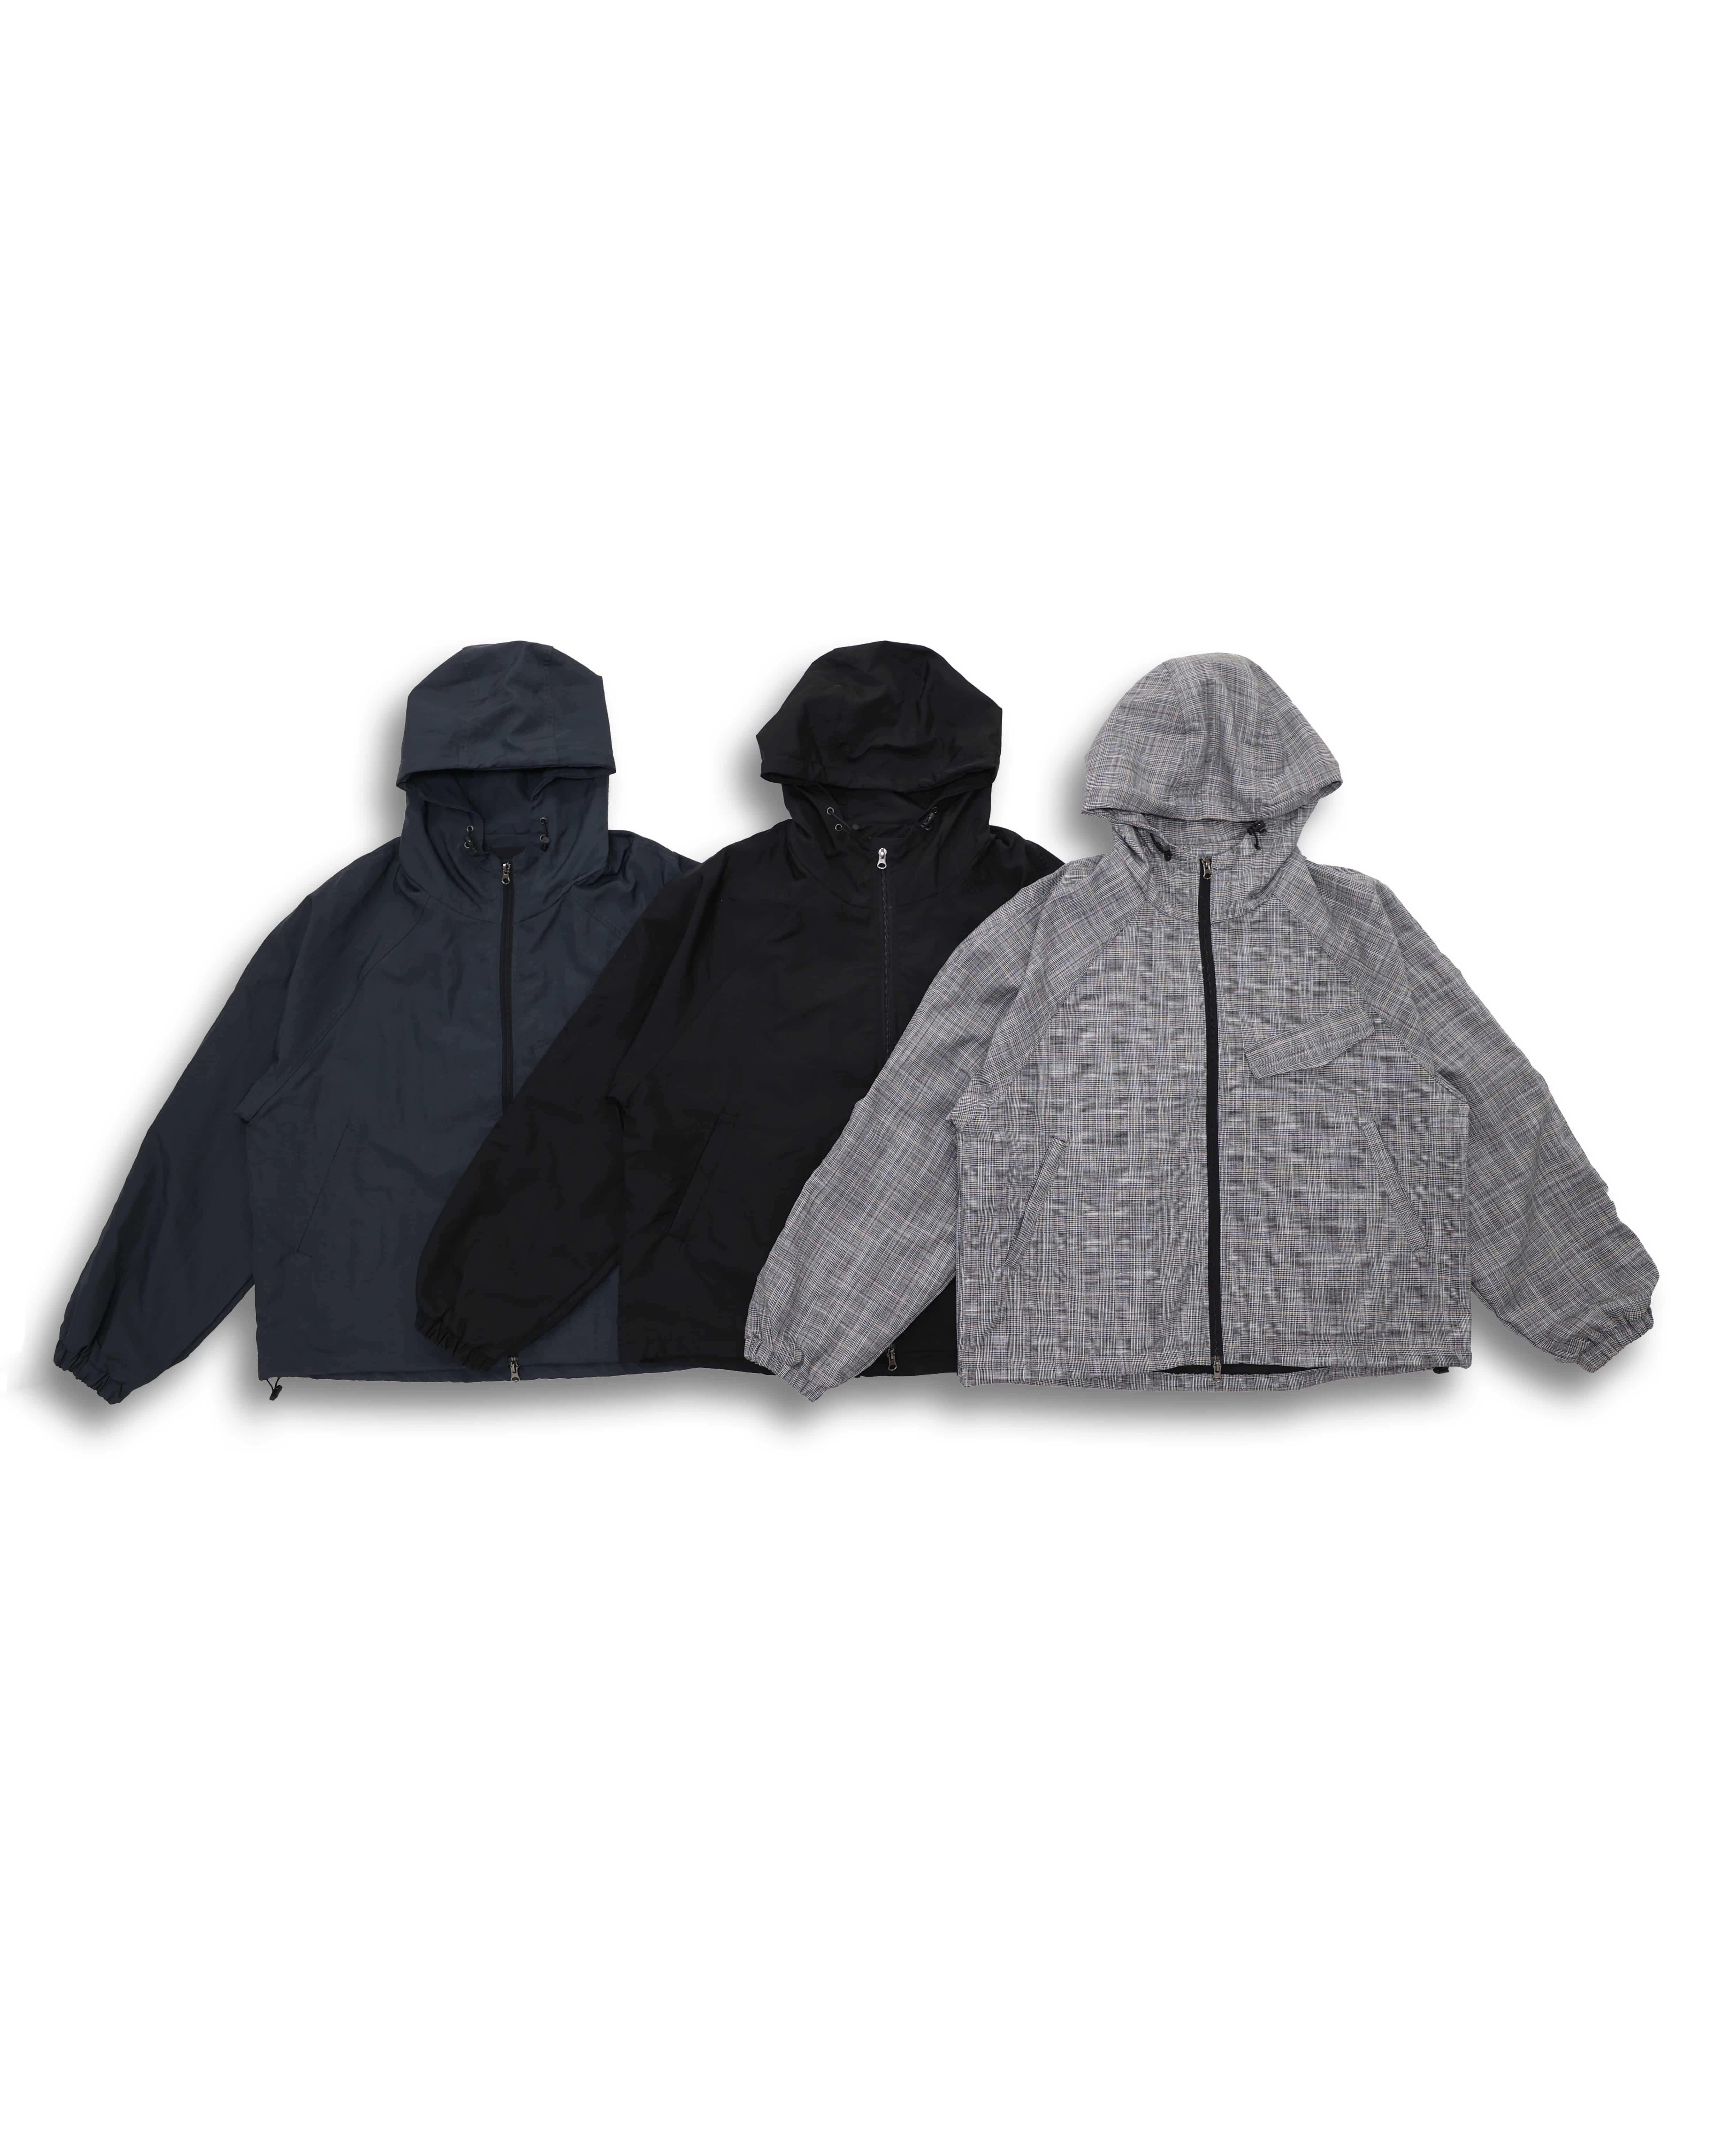 FITS Garments Hoodied Wind Jacket (Black/Navy/Check)